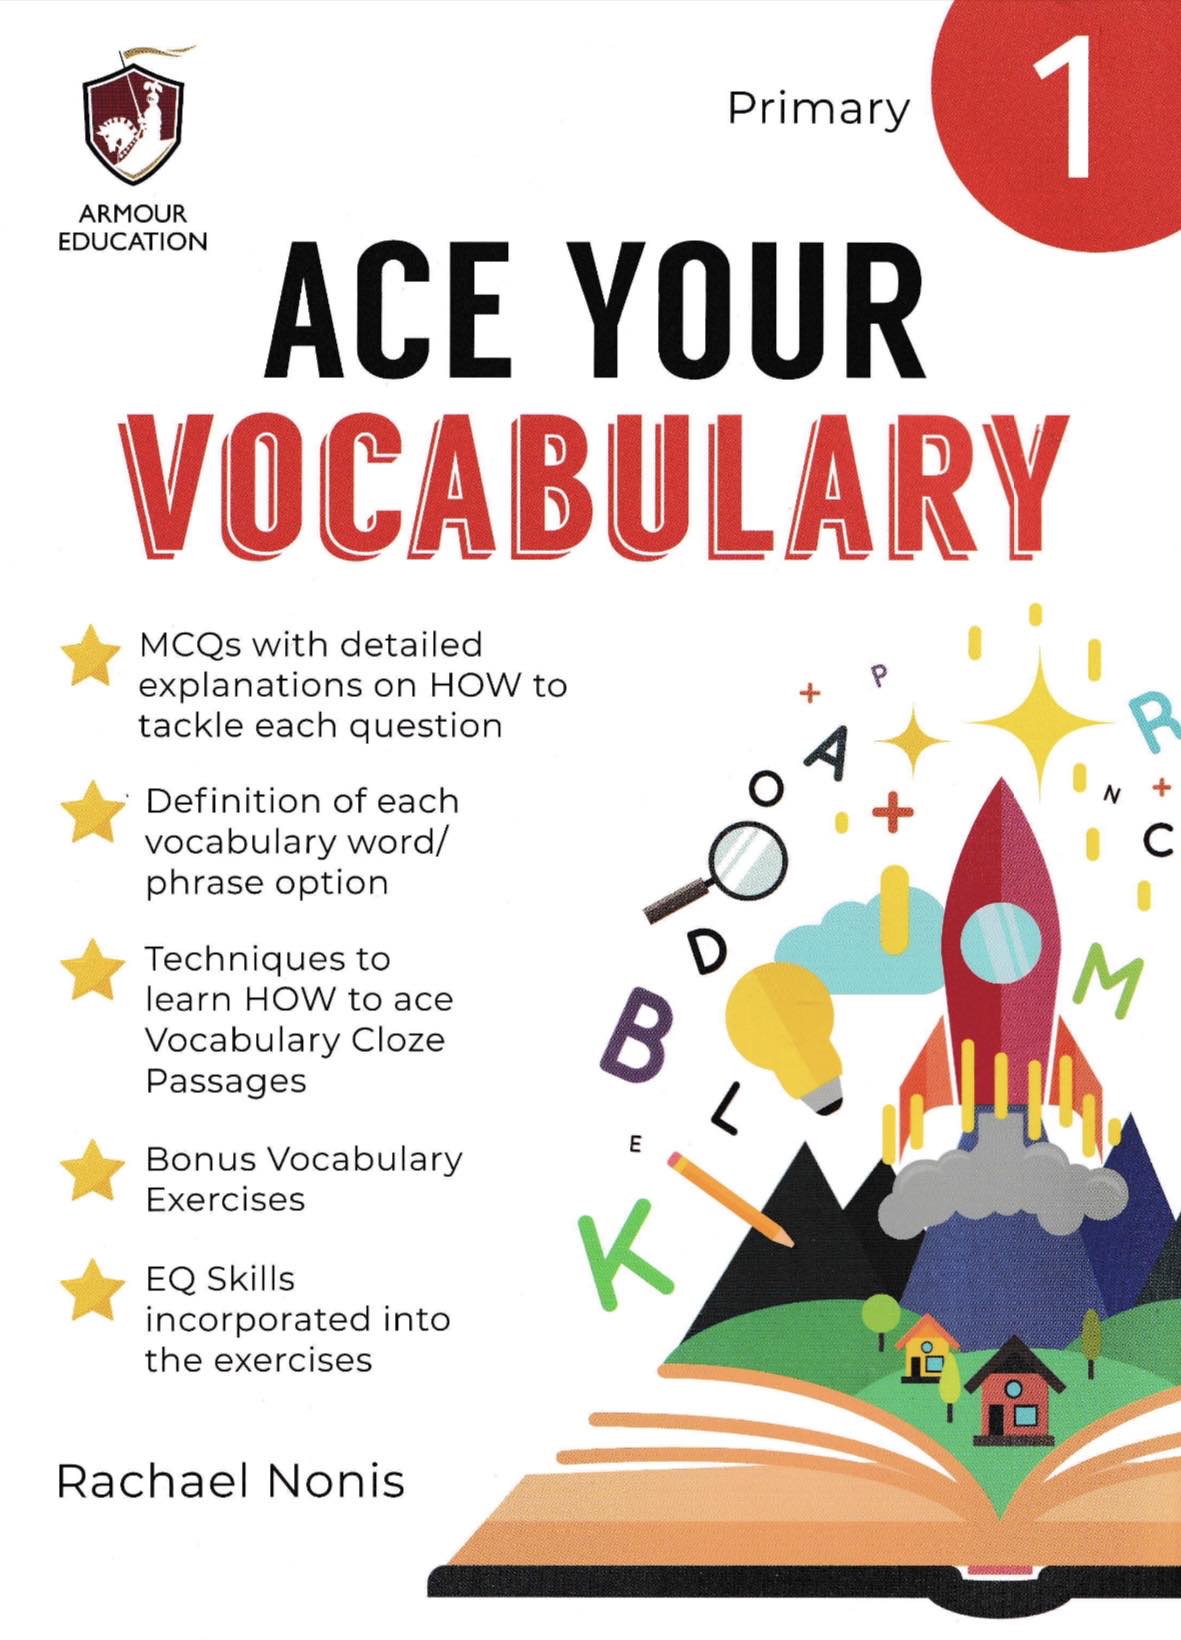 Ace Your Vocabulary for Primary Levels